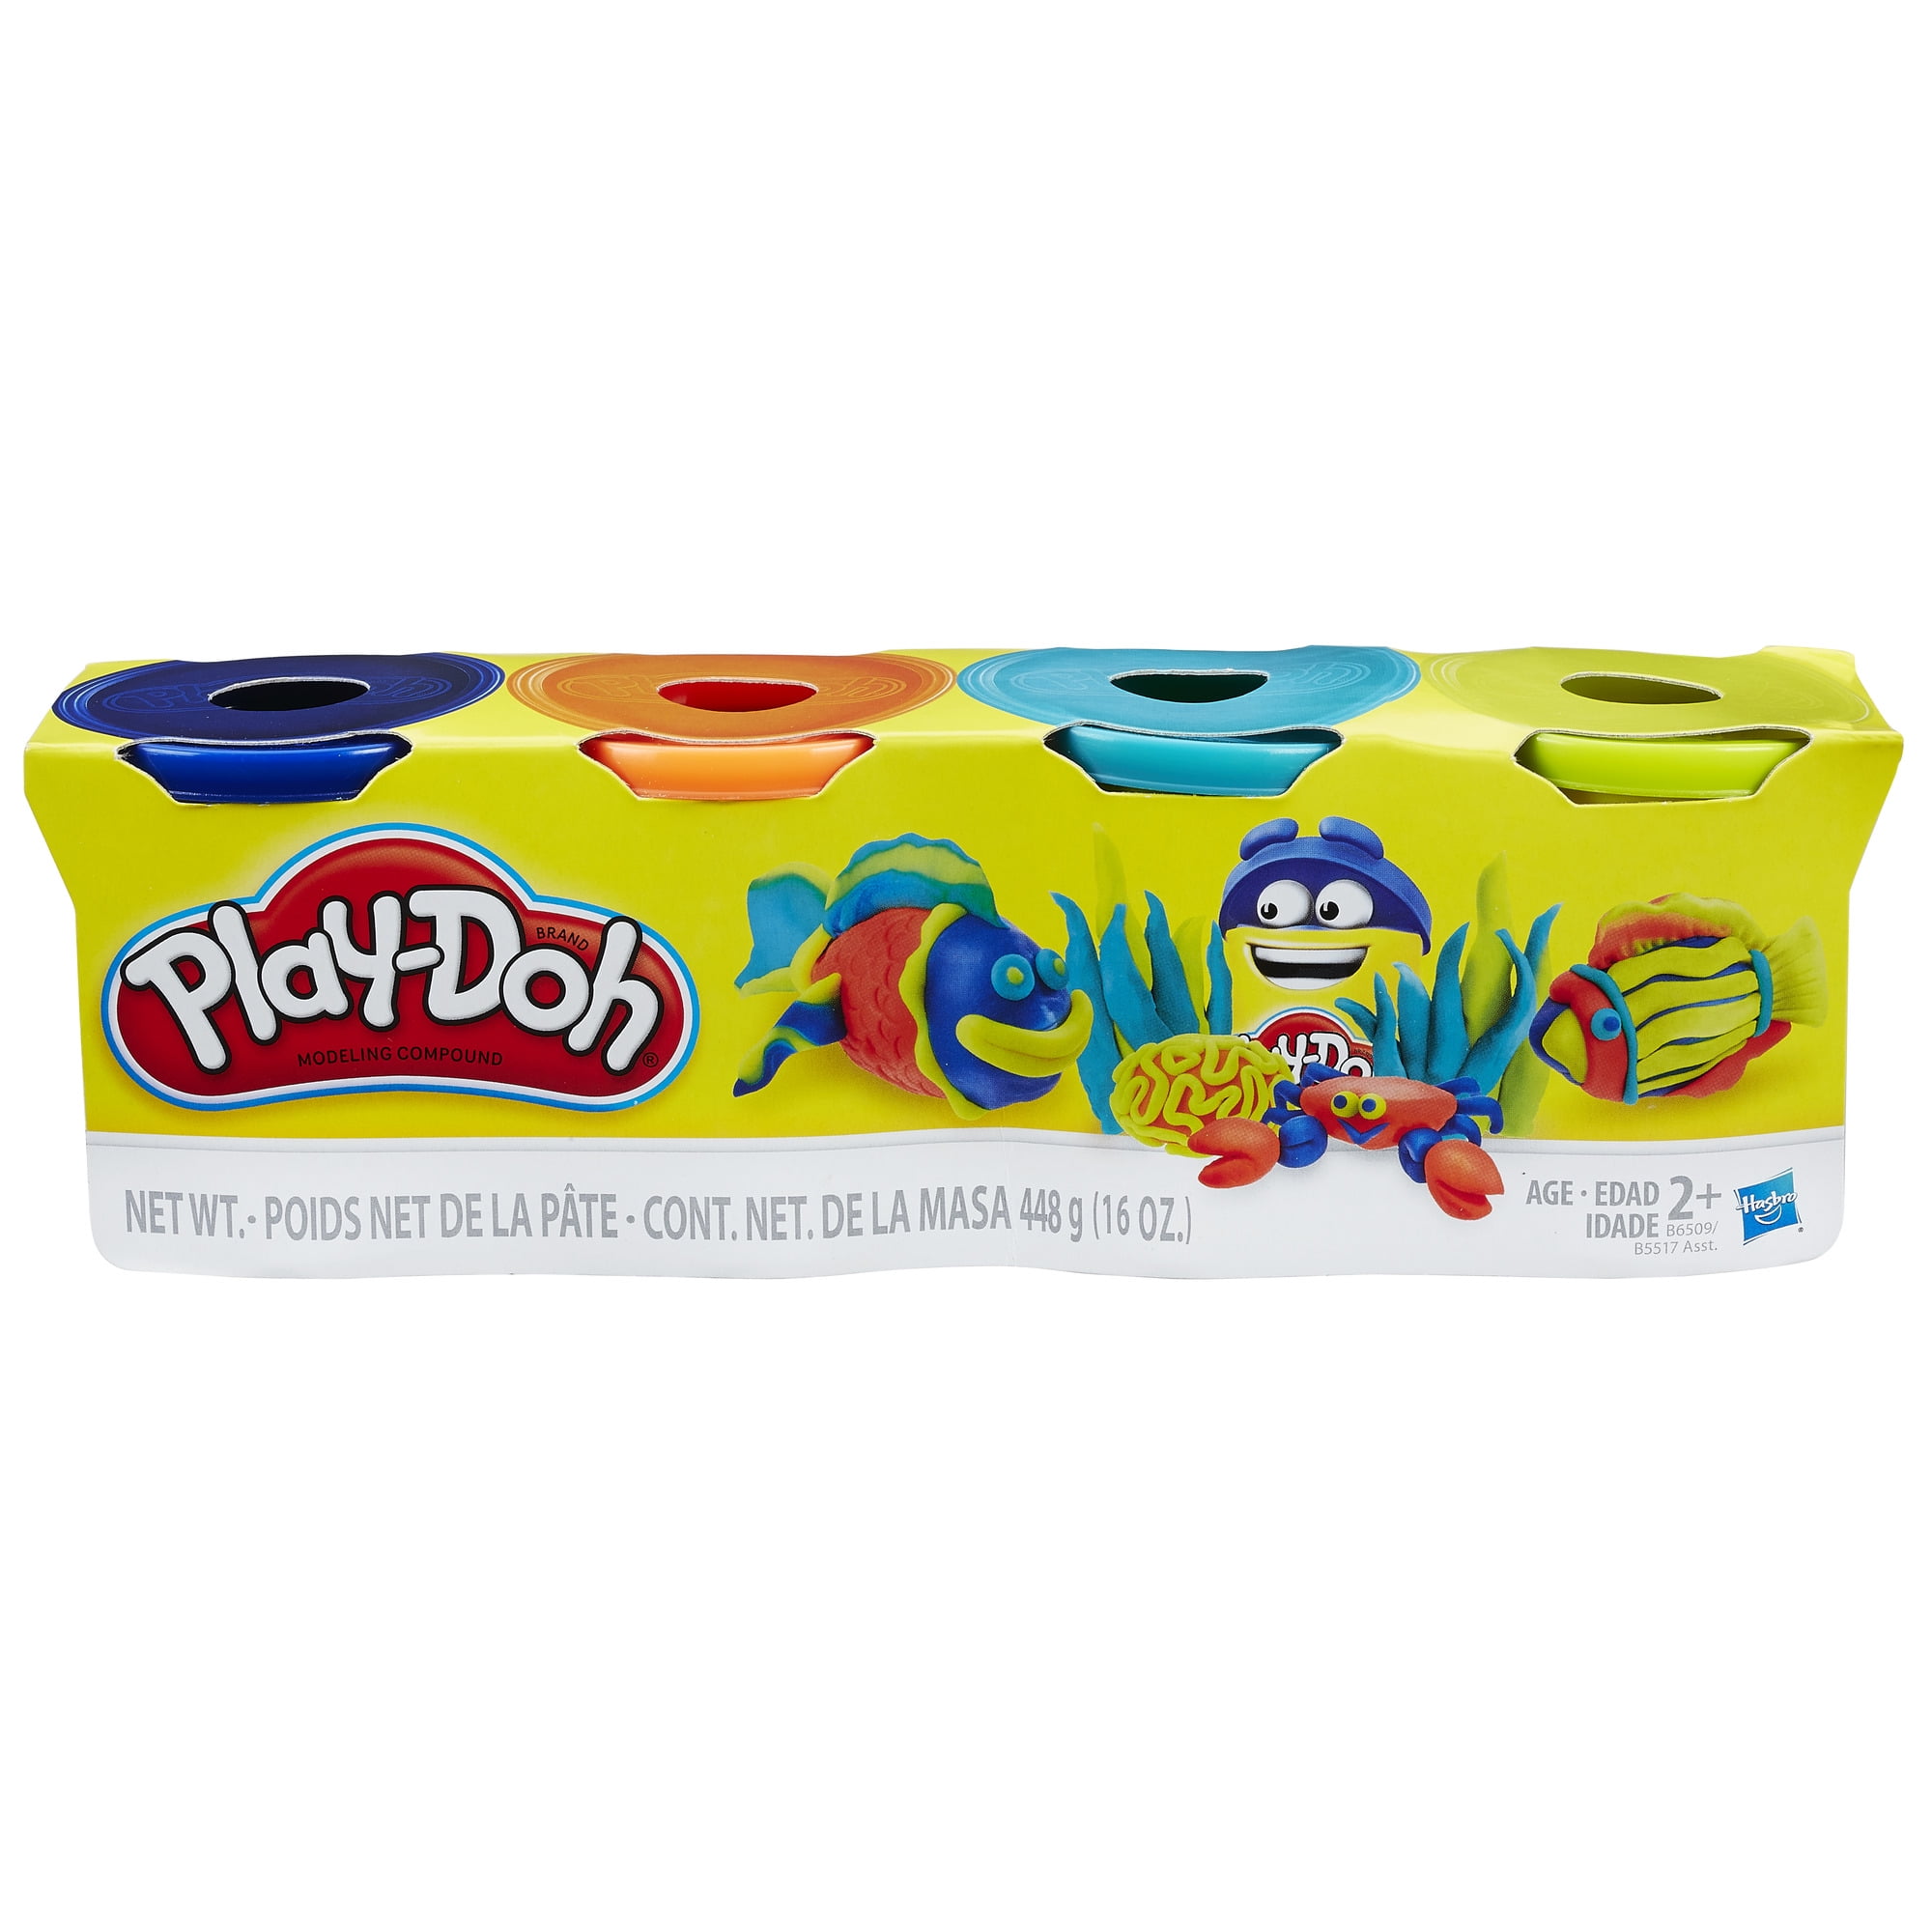 Play-Doh 4-pack of Classic Colors Net WT 16oz for sale online 